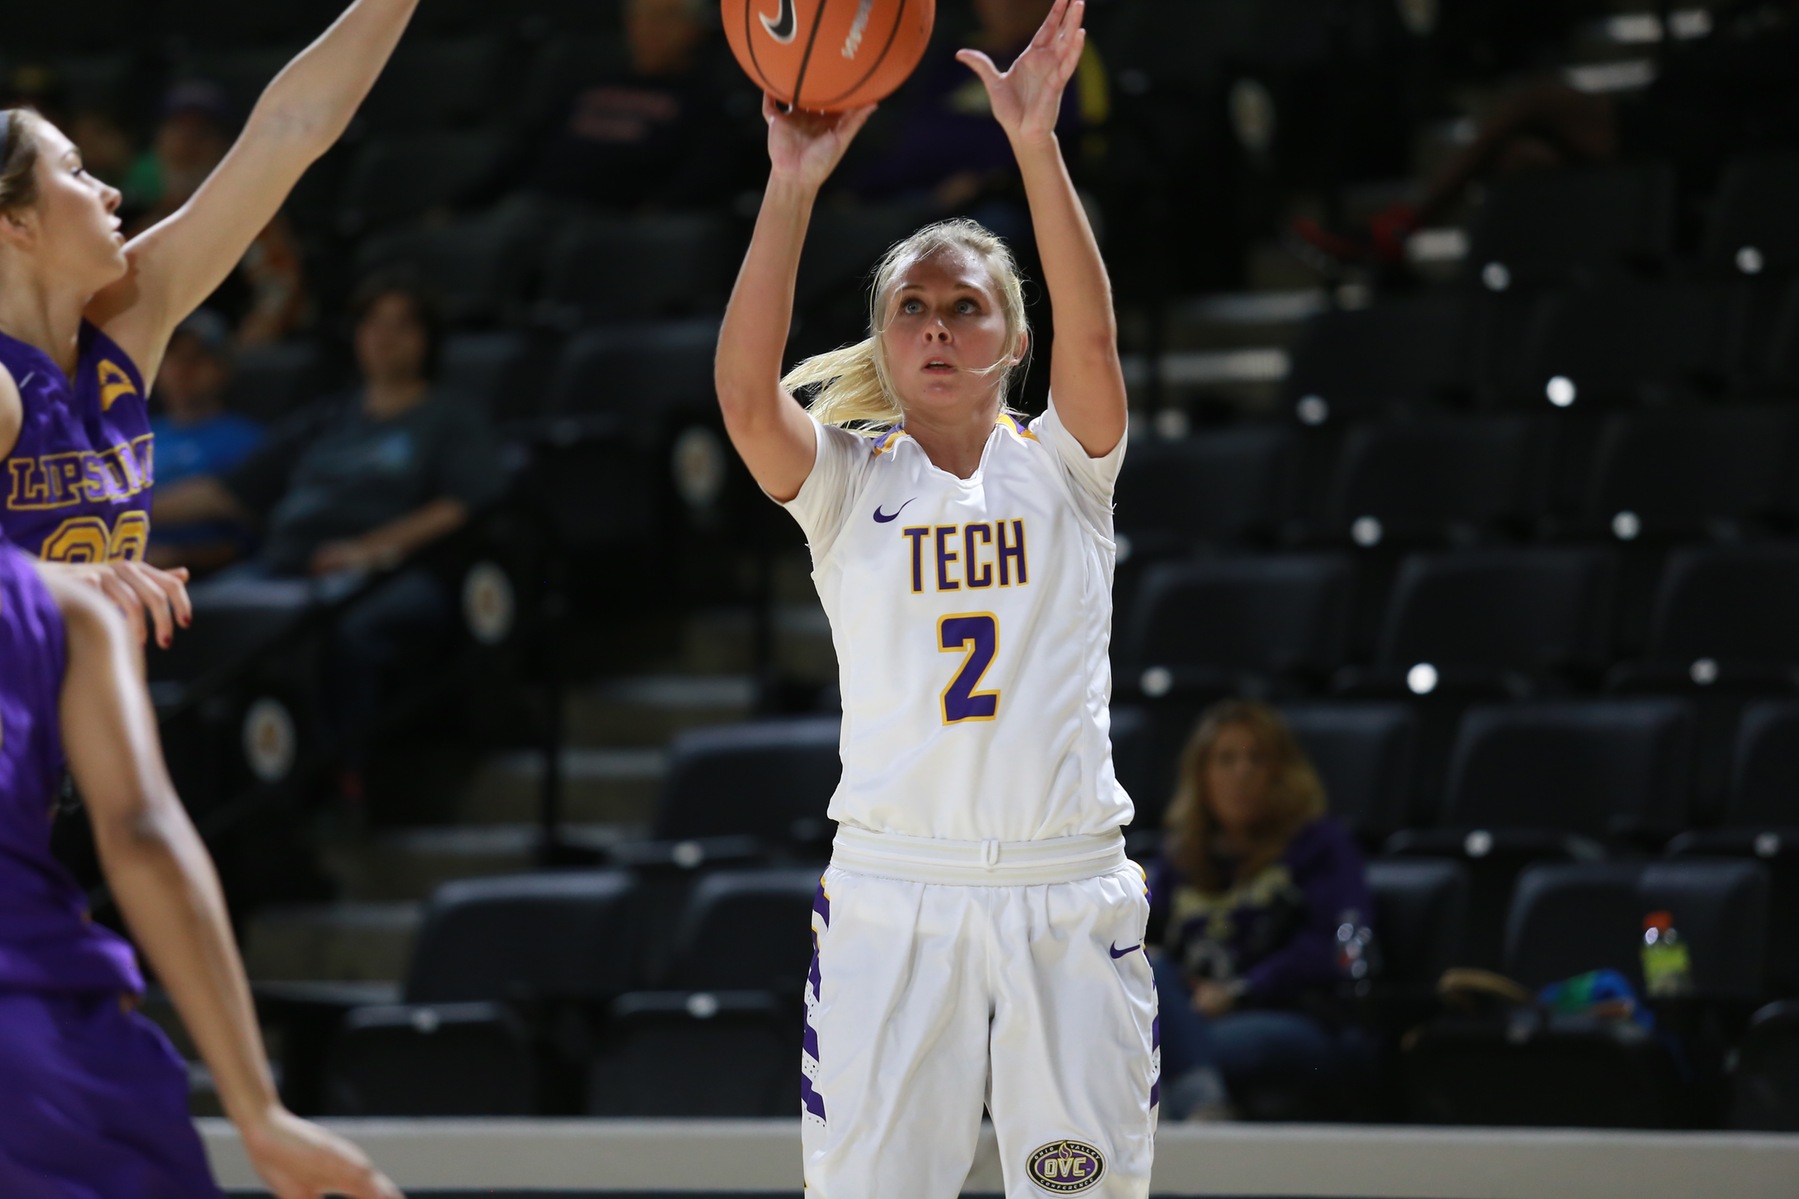 Tech ends non-conference play with close loss to Lipscomb